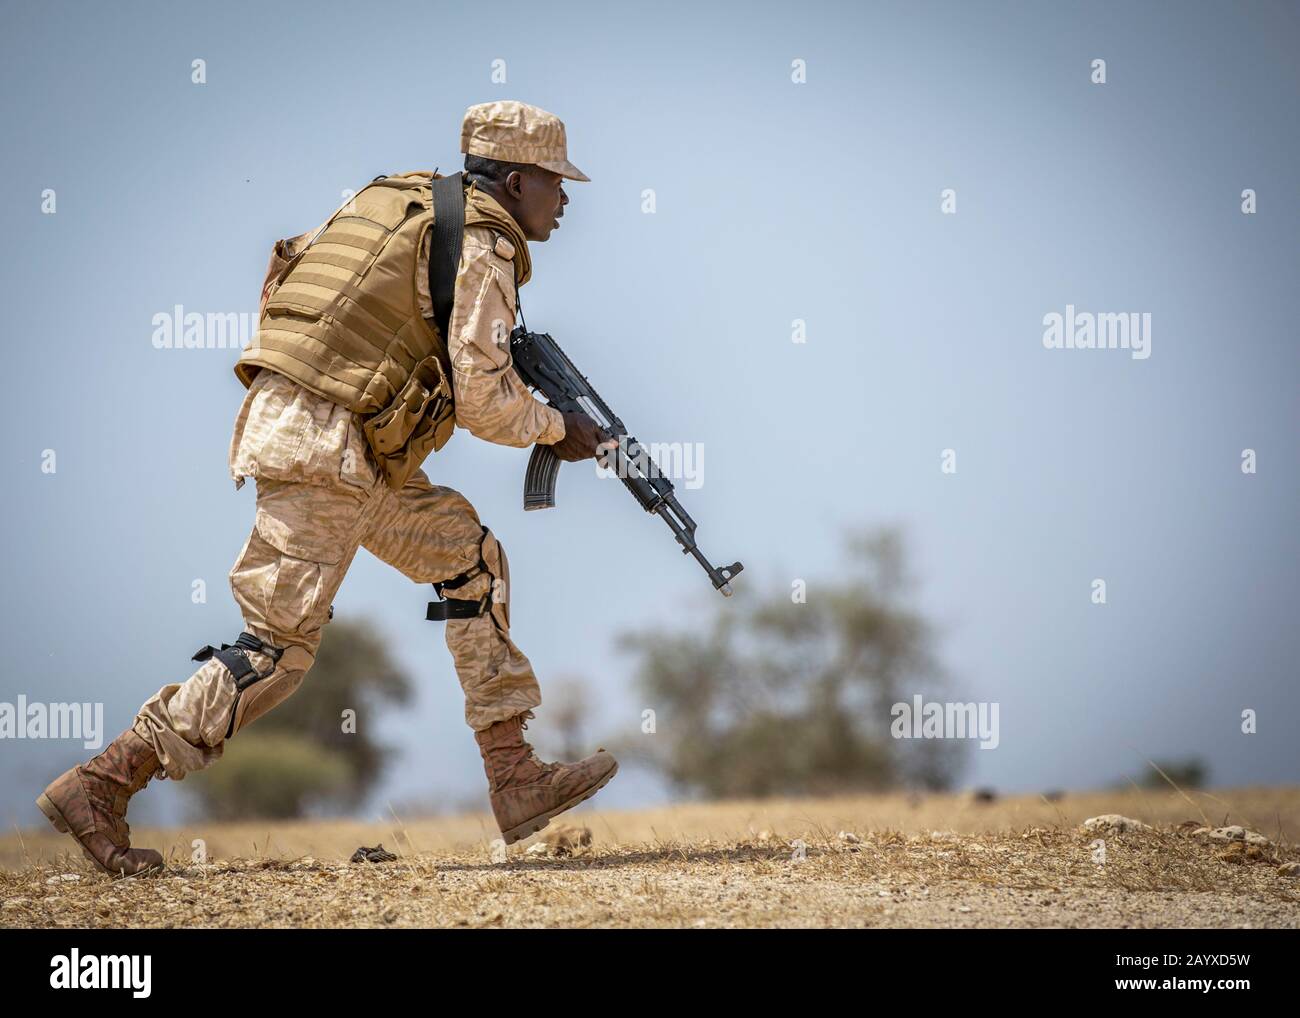 Thies, Senegal. 16th Feb, 2020. A Burkinabe Soldier rushes to a fighting position during a training patrol at Flintlock 20 February 16, 2020 near Thies, Senegal. Flintlock is the largest annual Special Operations Forces exercise in Africa involving U.S and Allied troops and African partner nations. Credit: Miguel Pena/Planetpix/Alamy Live News Credit: Planetpix/Alamy Live News Stock Photo